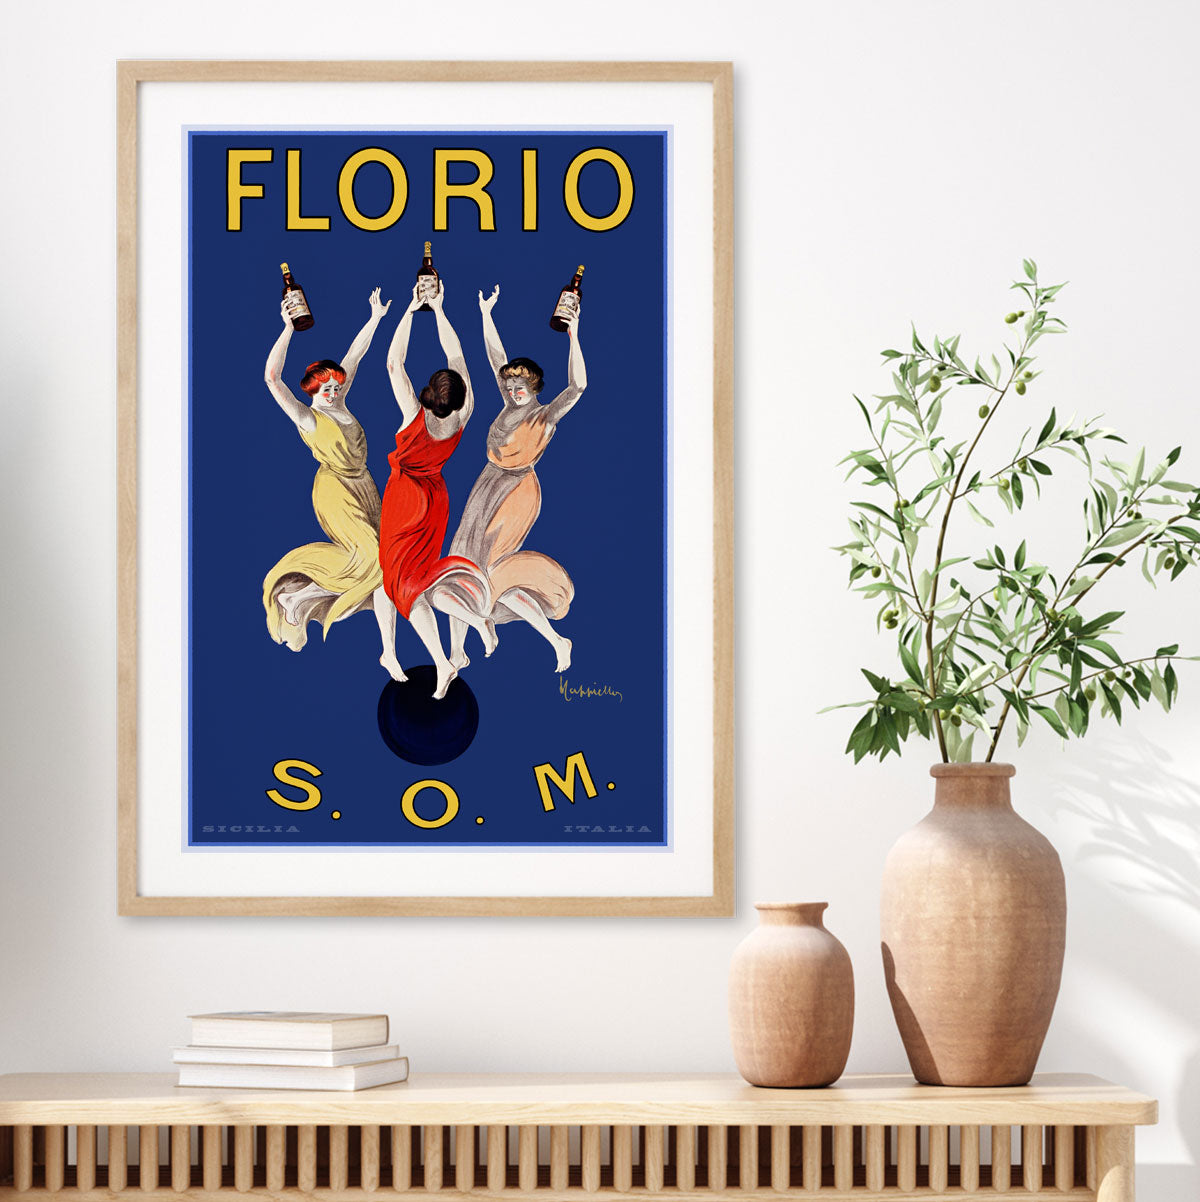 Florio Marsala vintage retro advertising poster in oak frame from Places We Luv